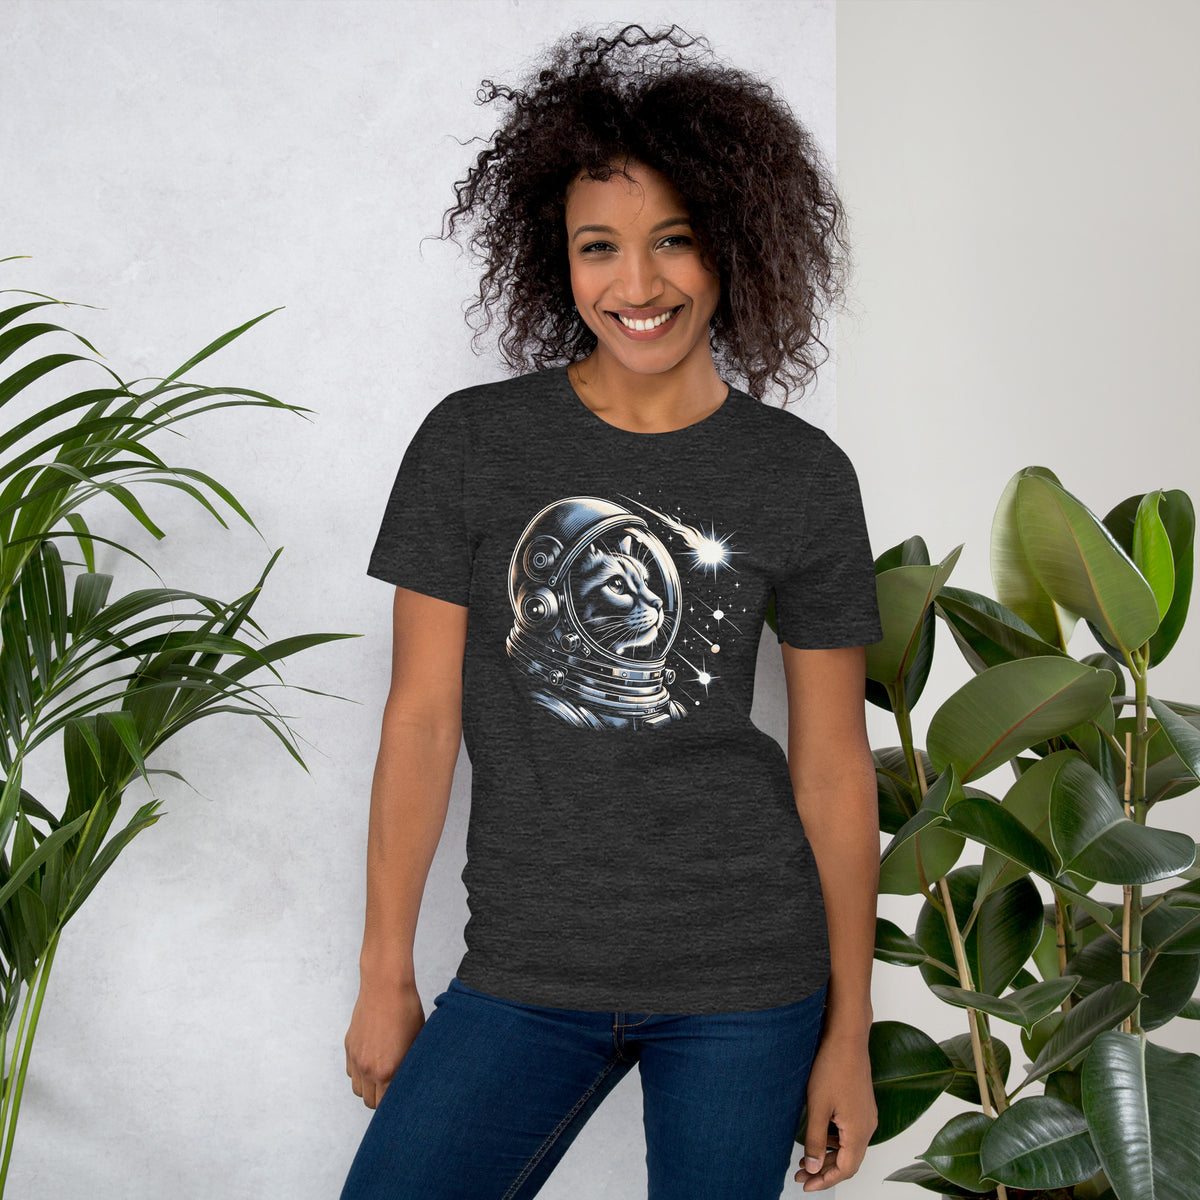 Space Cat Astronaut Shirt, Outer Space Tee, Cool Galaxy Kitty, Sci-Fi Astronomy Lover T-Shirt, Animal in Space